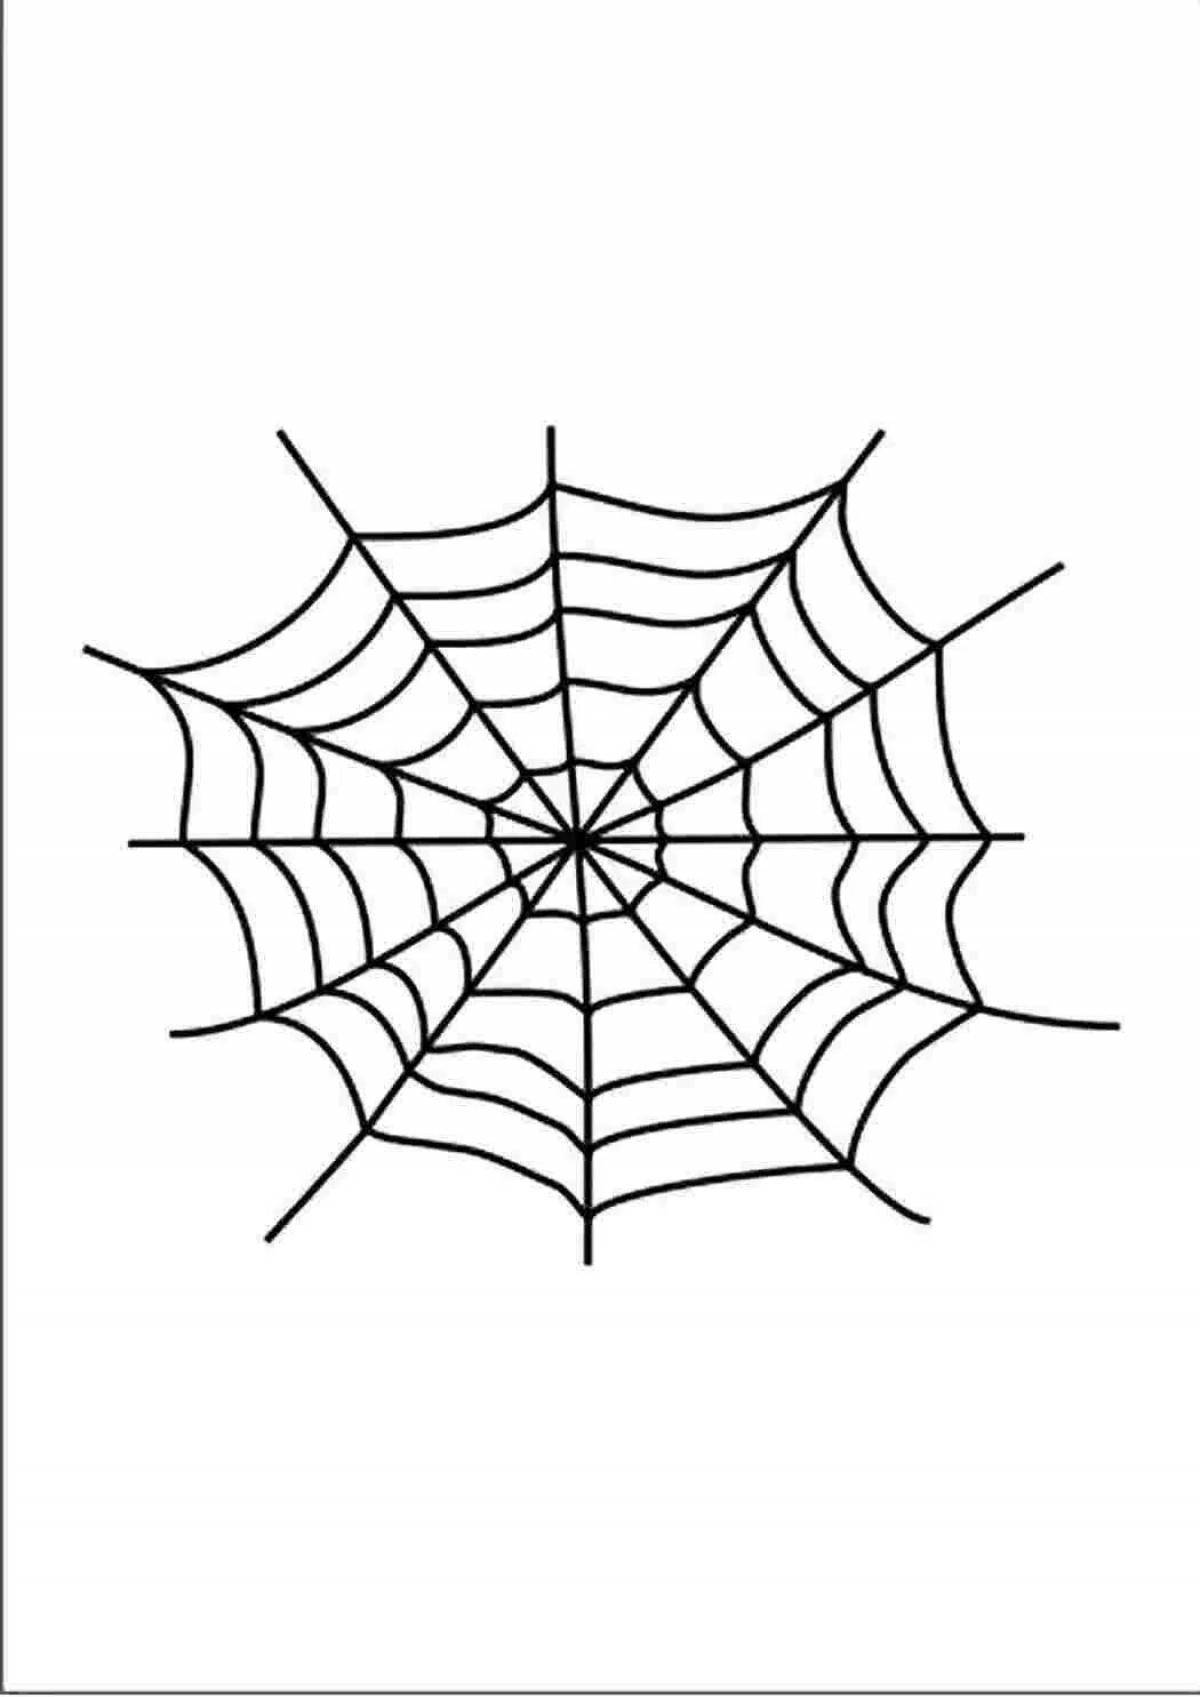 Fascinating web coloring book for kids